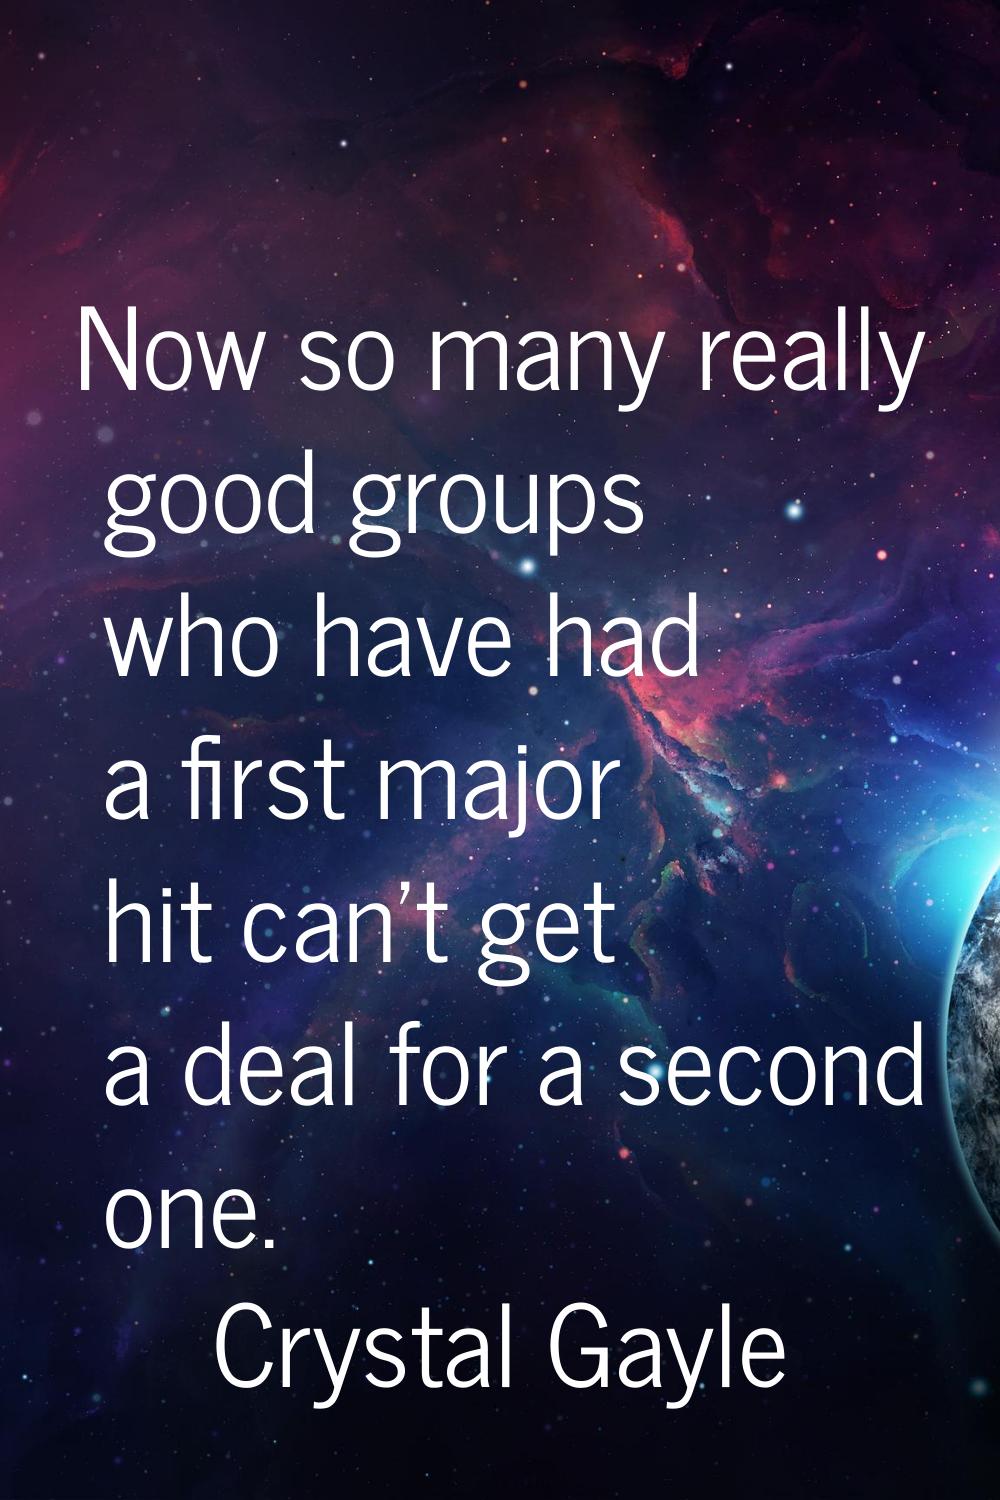 Now so many really good groups who have had a first major hit can't get a deal for a second one.